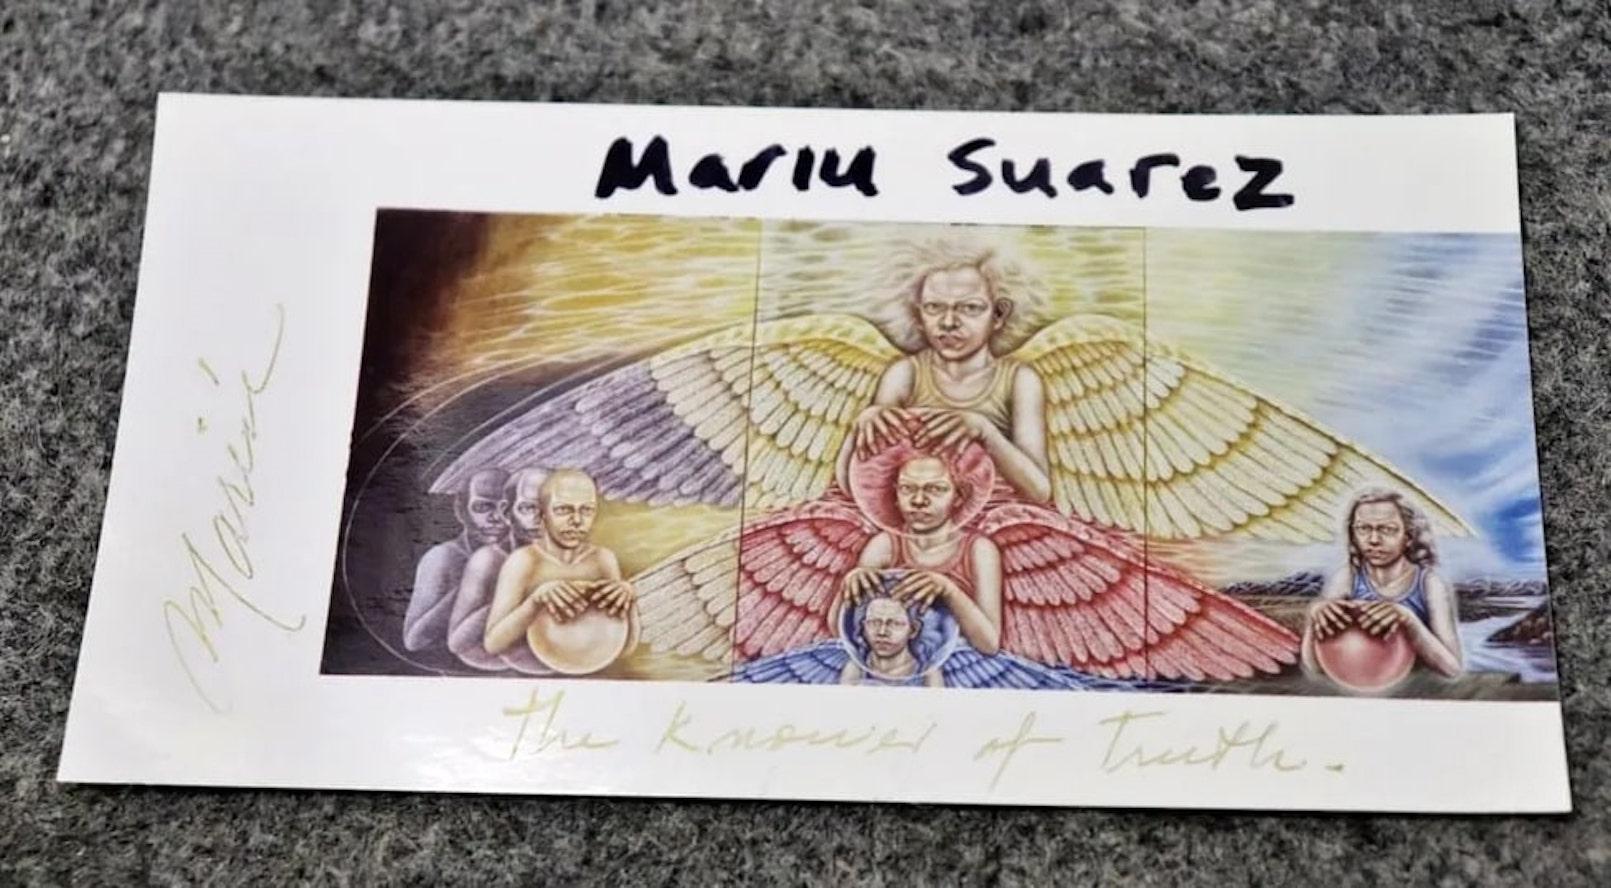 Paper Mariu Suarez 'Growing In New Dimensions' Signed For Sale